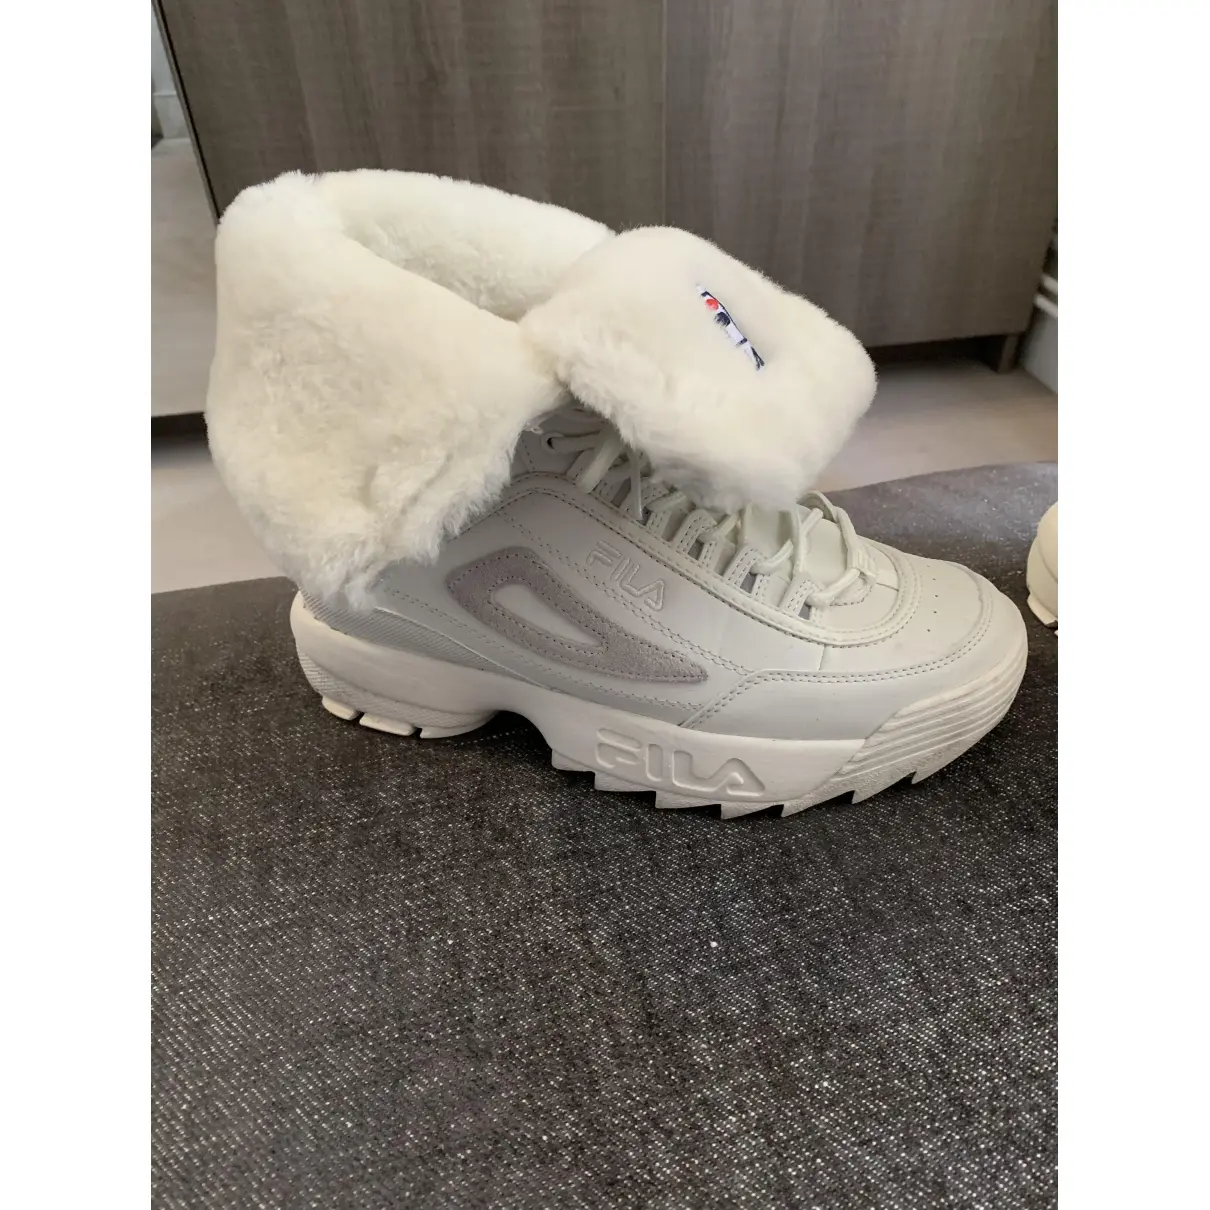 Buy Fila Leather snow boots online